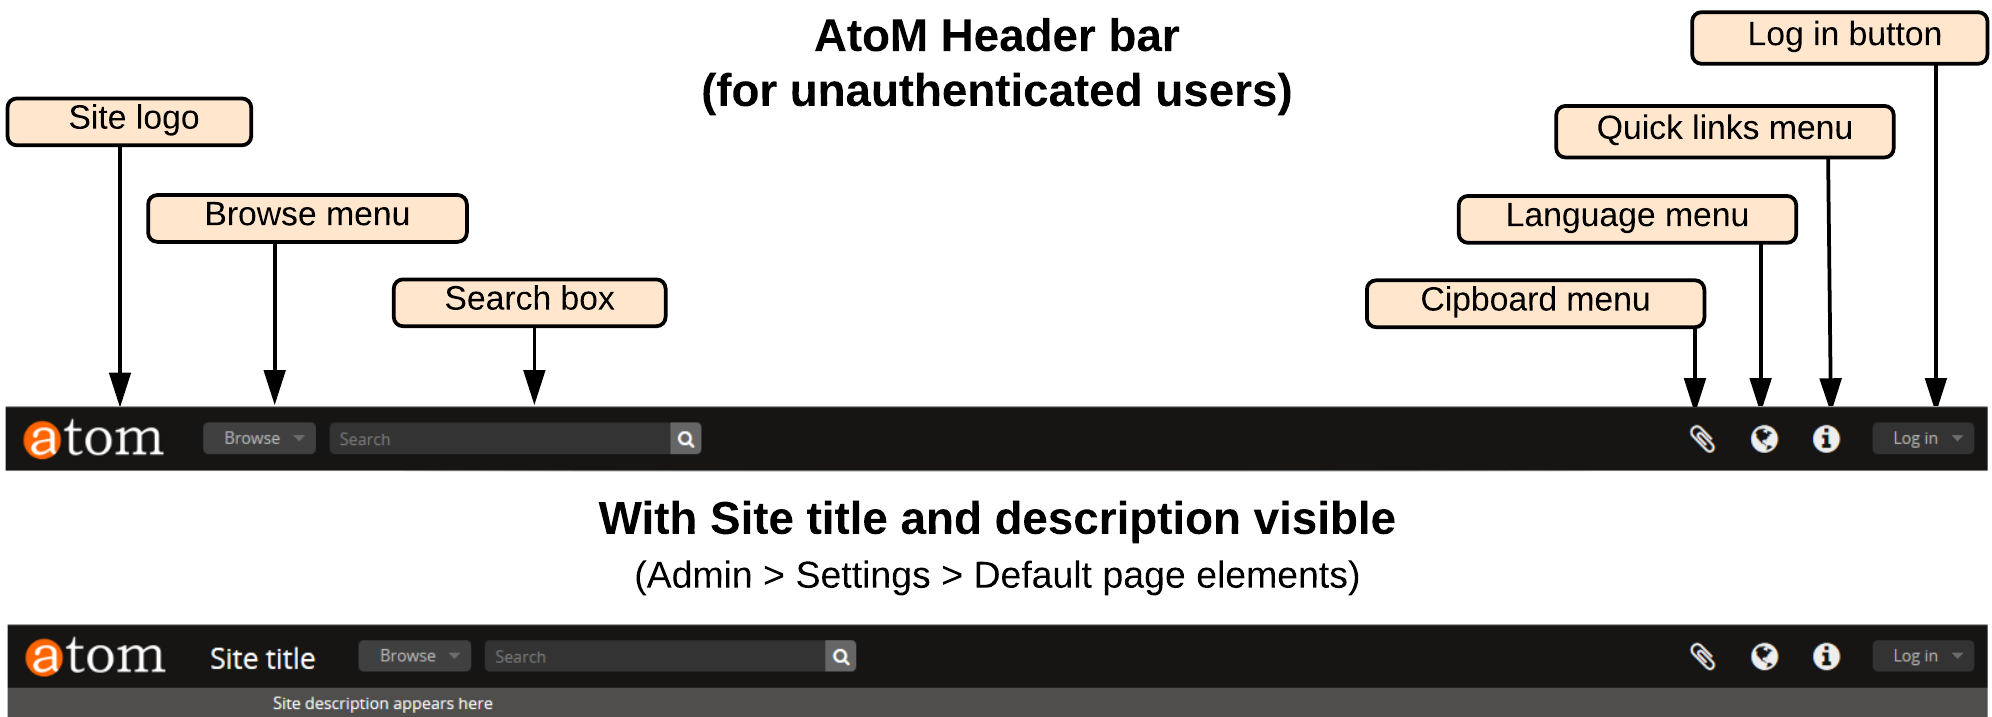 An image of the AtoM Header bar for unauthenticated users